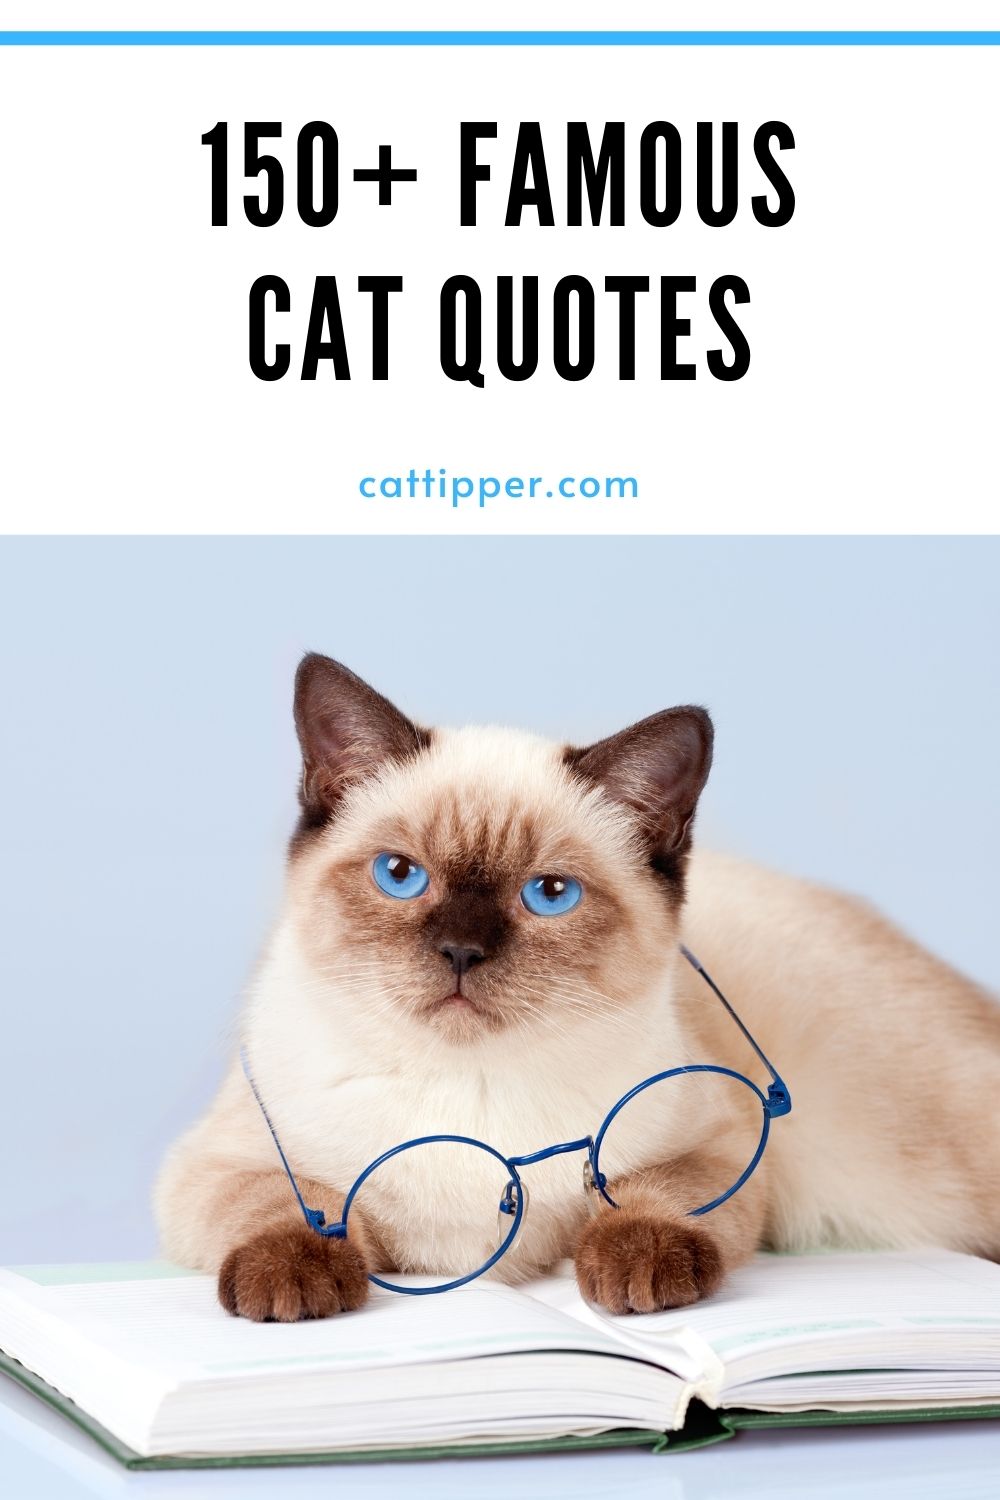 150+ Famous Cat Quotes to Make Cat Lovers Purr! - CatTipper